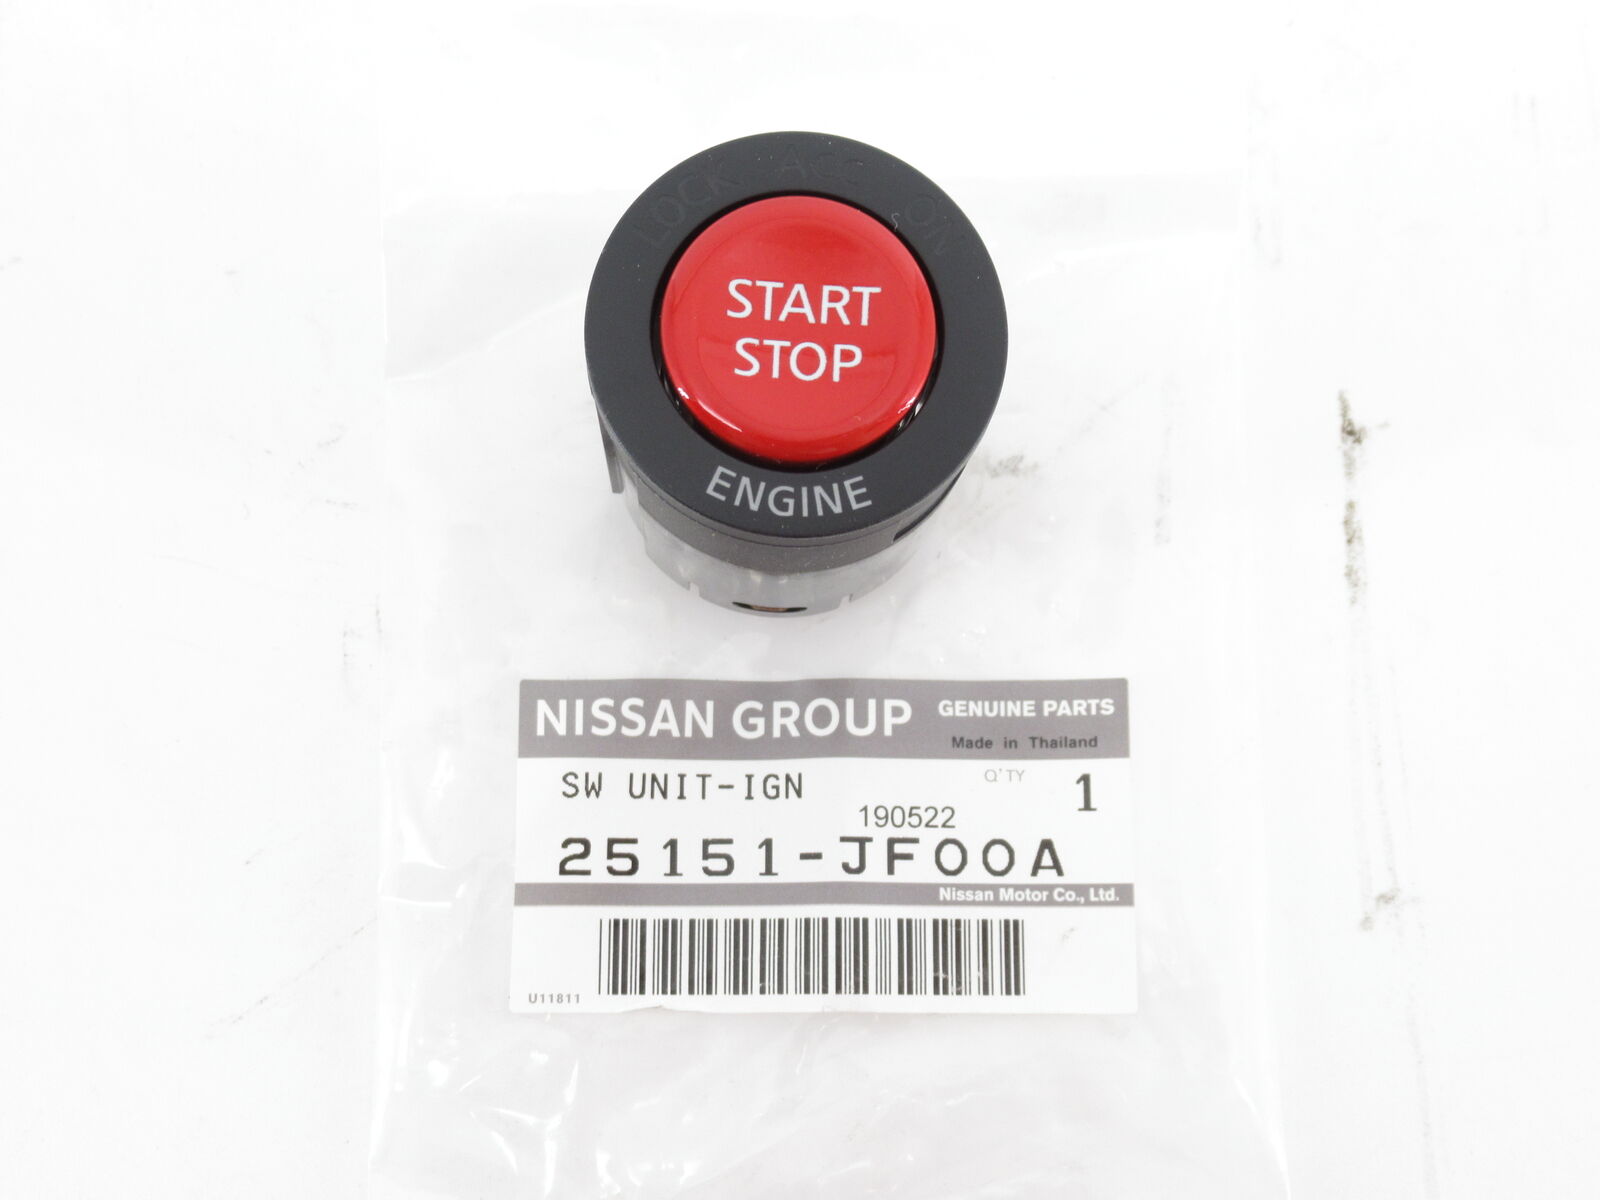 Genuine OEM Nissan 25151-JF00A Ignition Push Button Start Switch 2009-2018 GT-R